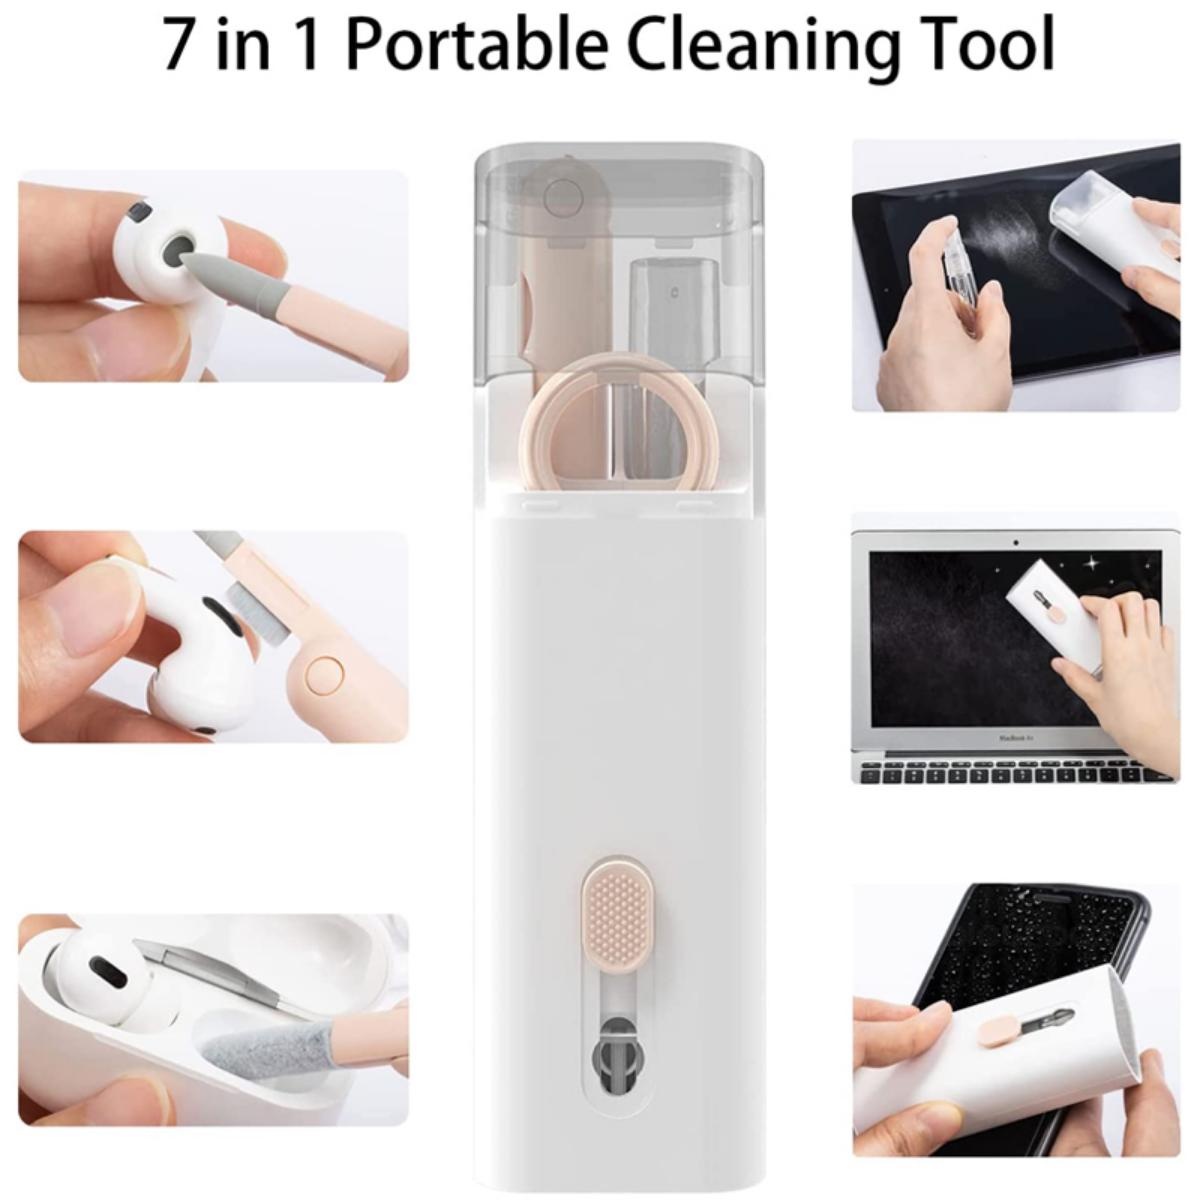 7-in-1 Cleaning Kit Keyboard Cleaner Brush Earphones Cleaning Pen For  AirPods IPhone Cleaning Tools Keycap Puller Set Product